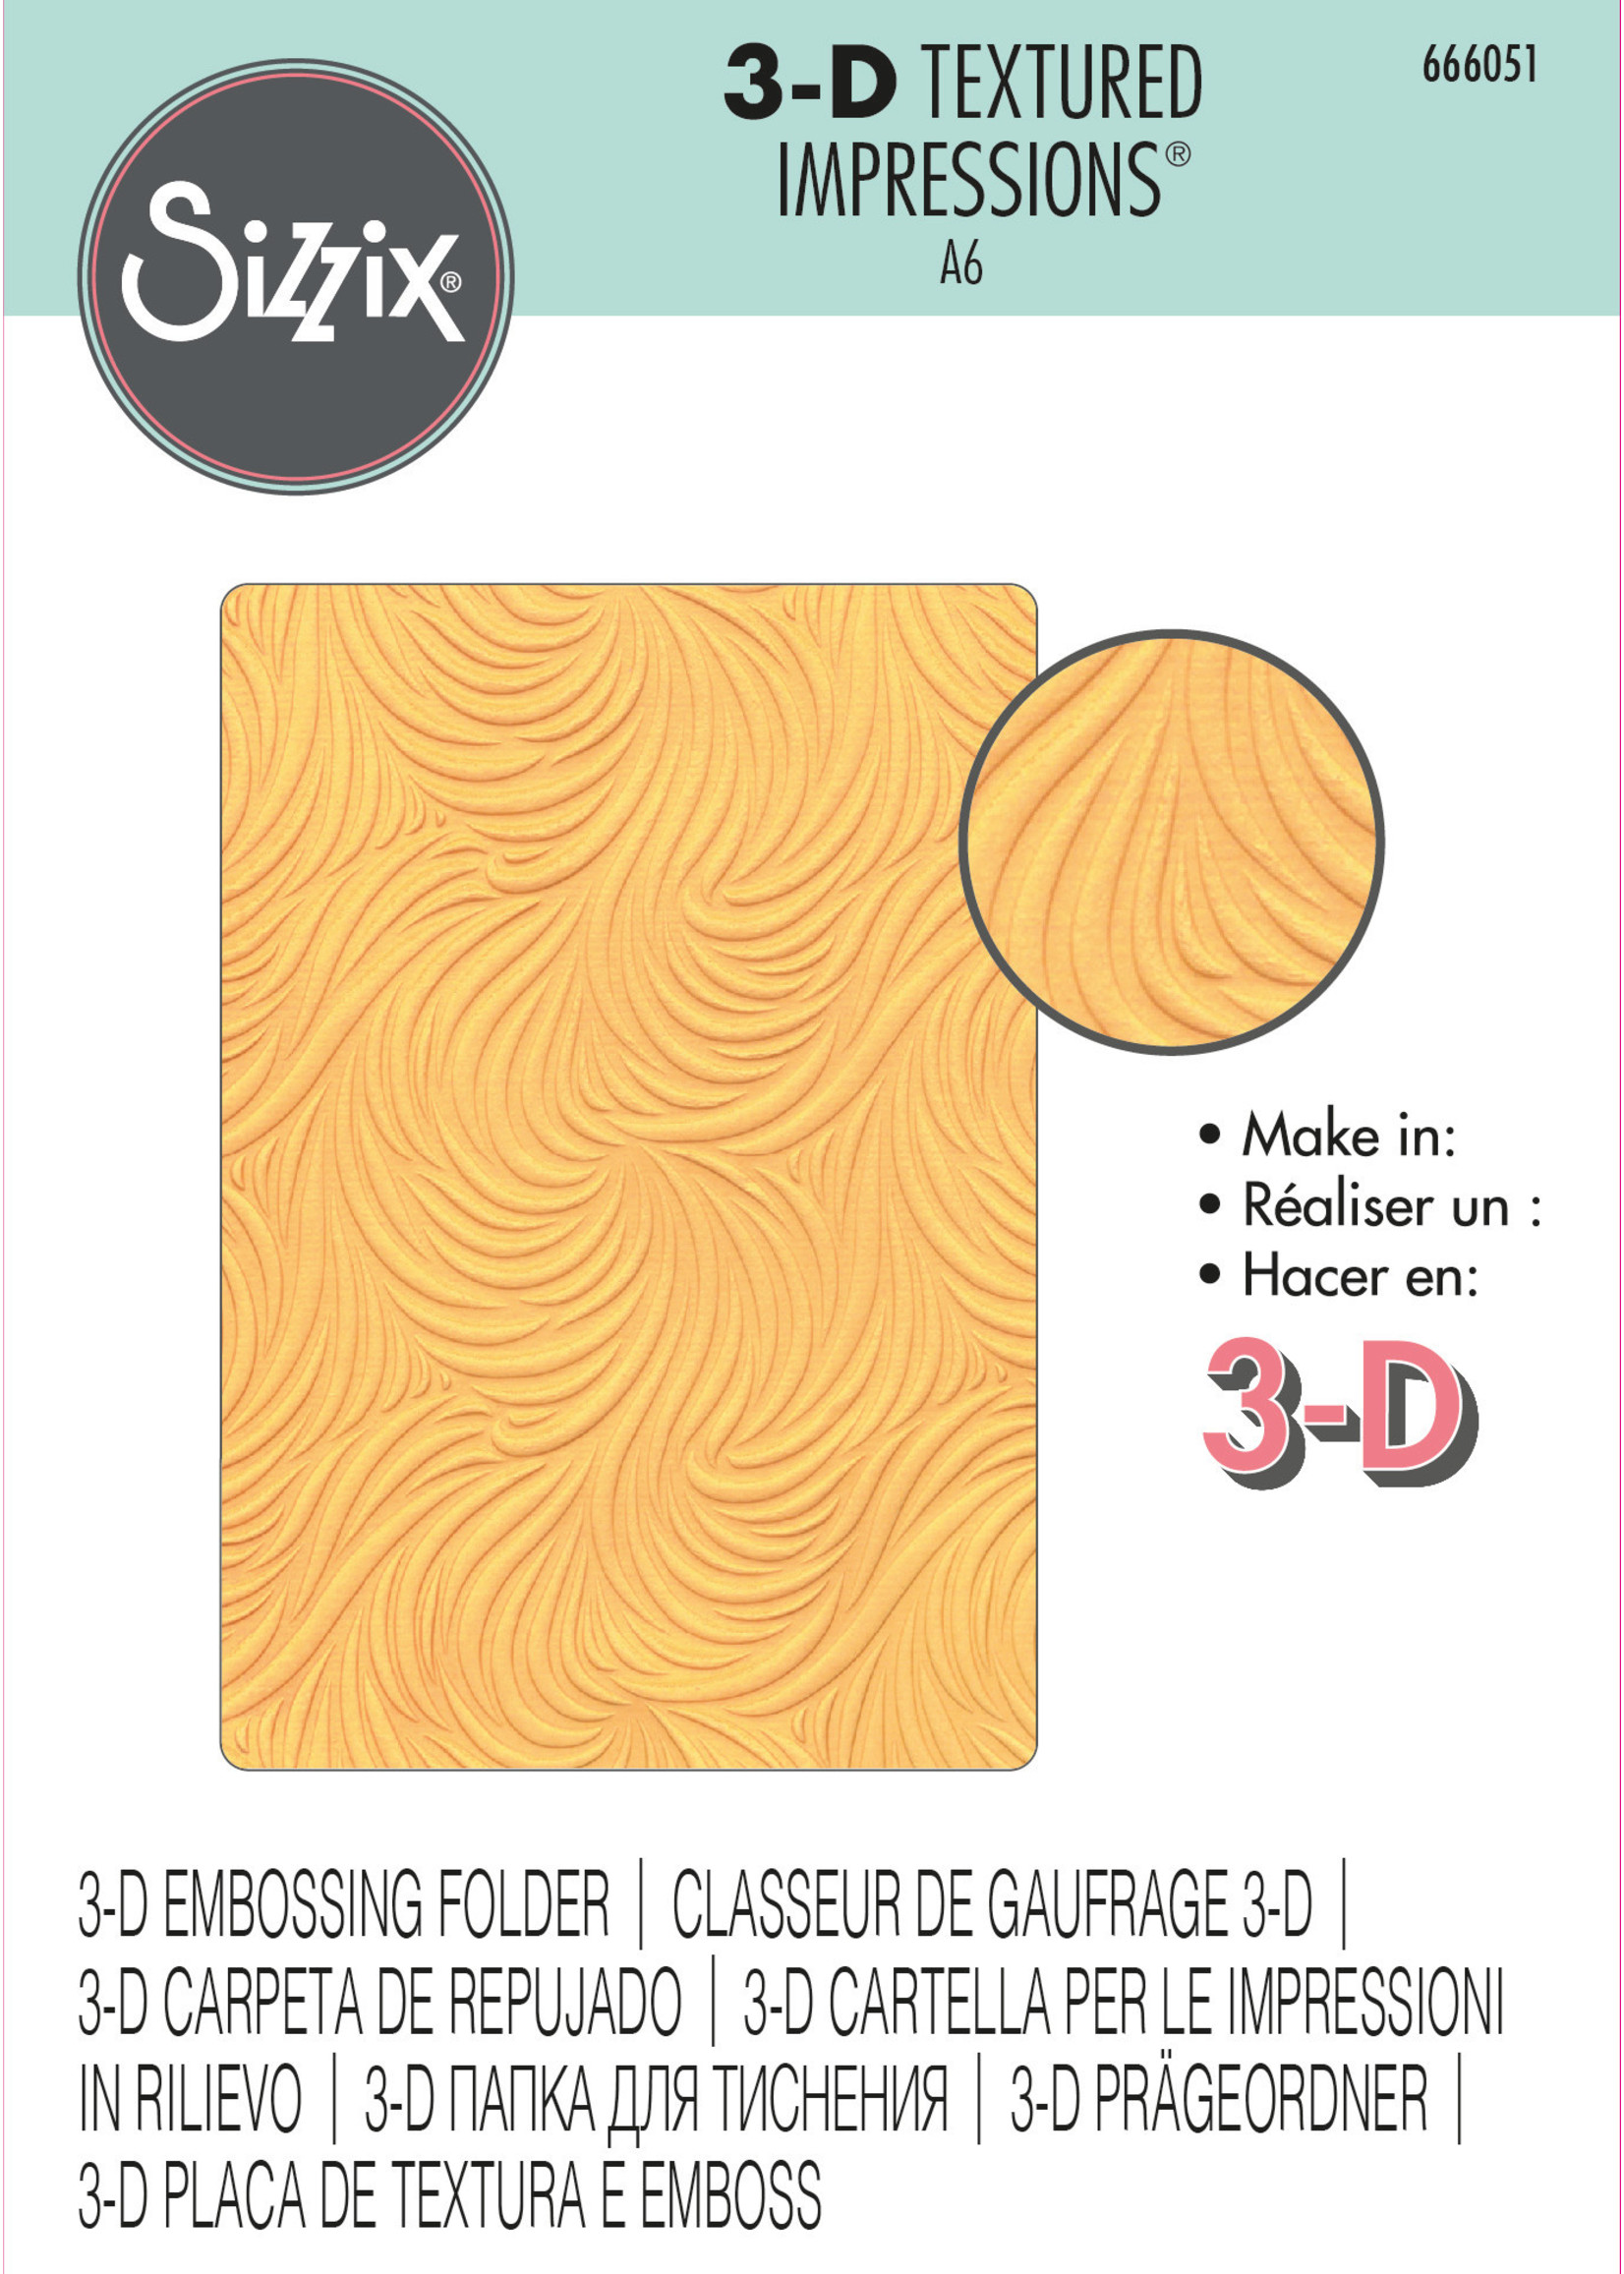 Sizzix Sizzix® 3-D Textured Impressions® Embossing Folder - Flowing Waves